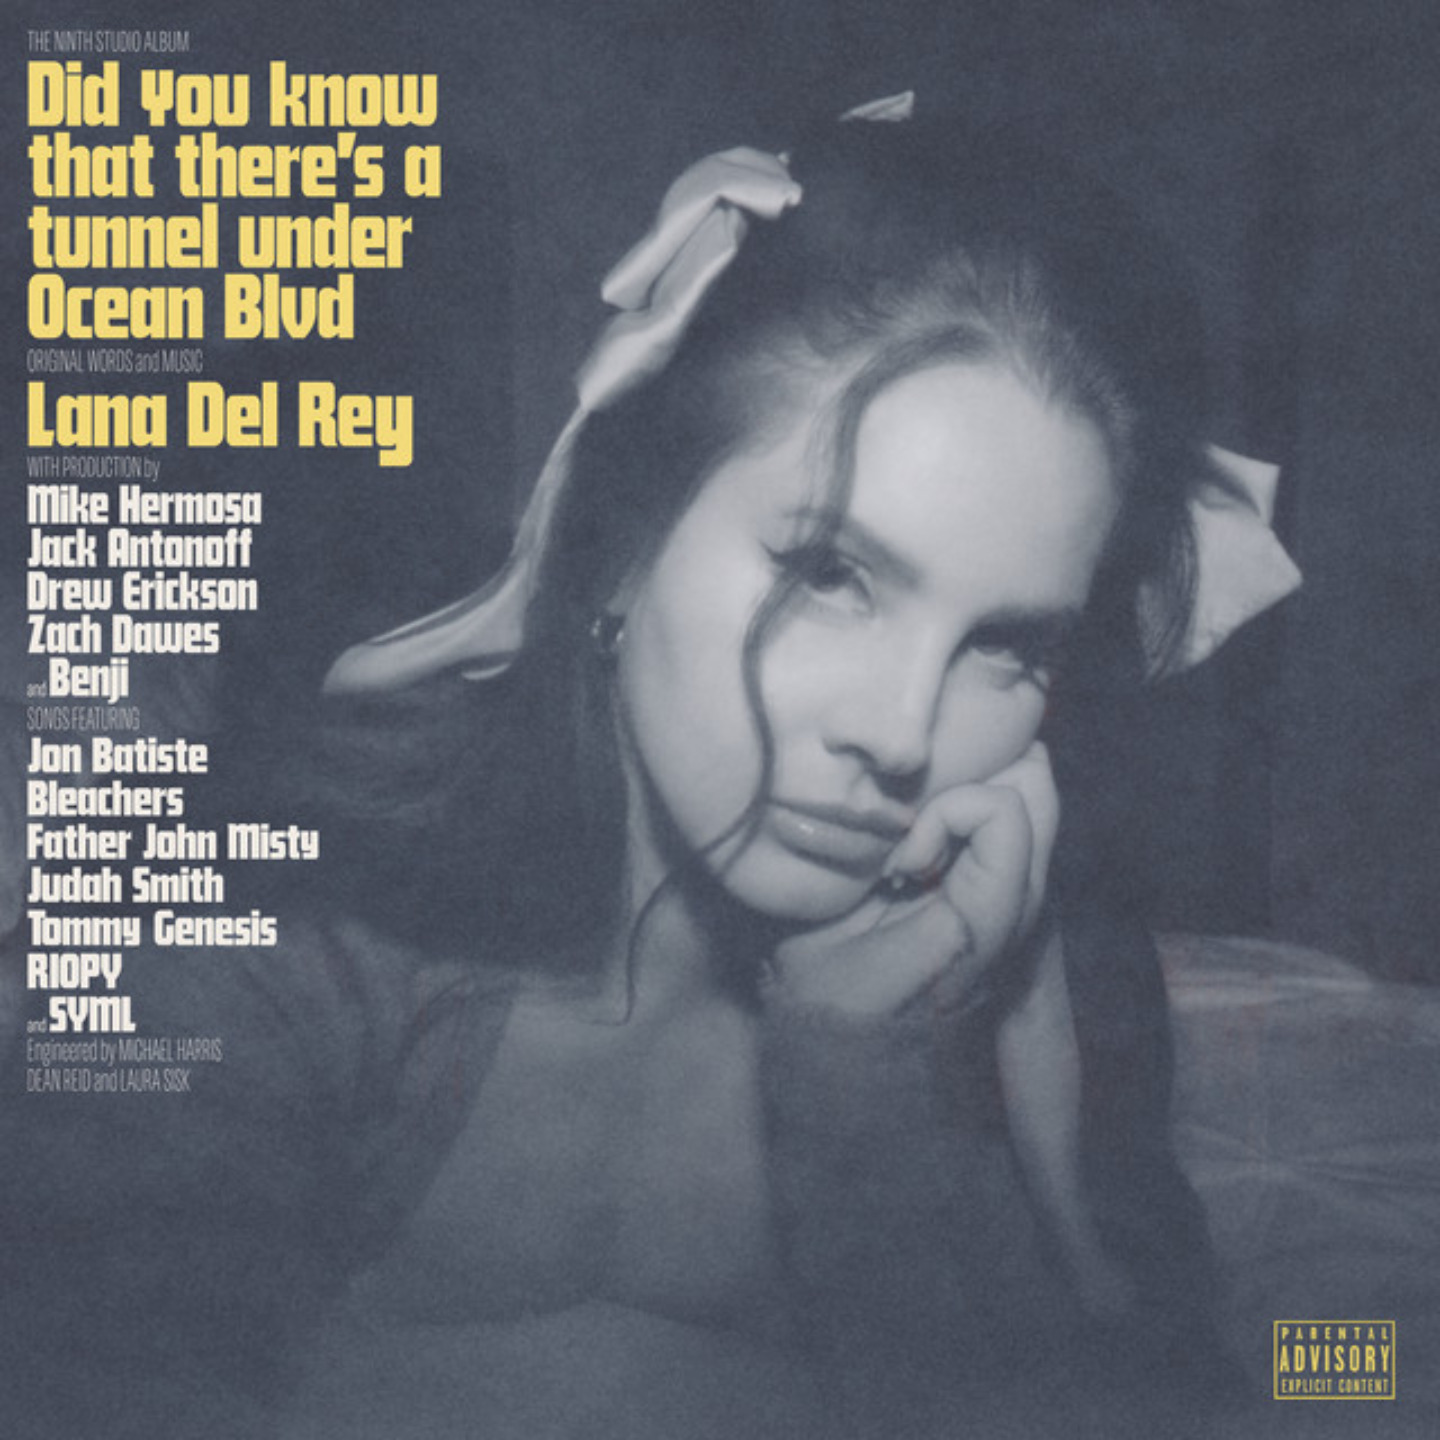 LANA DEL REY - Did You Know Theres a Tunnel Under Ocean Blvd 2xLP